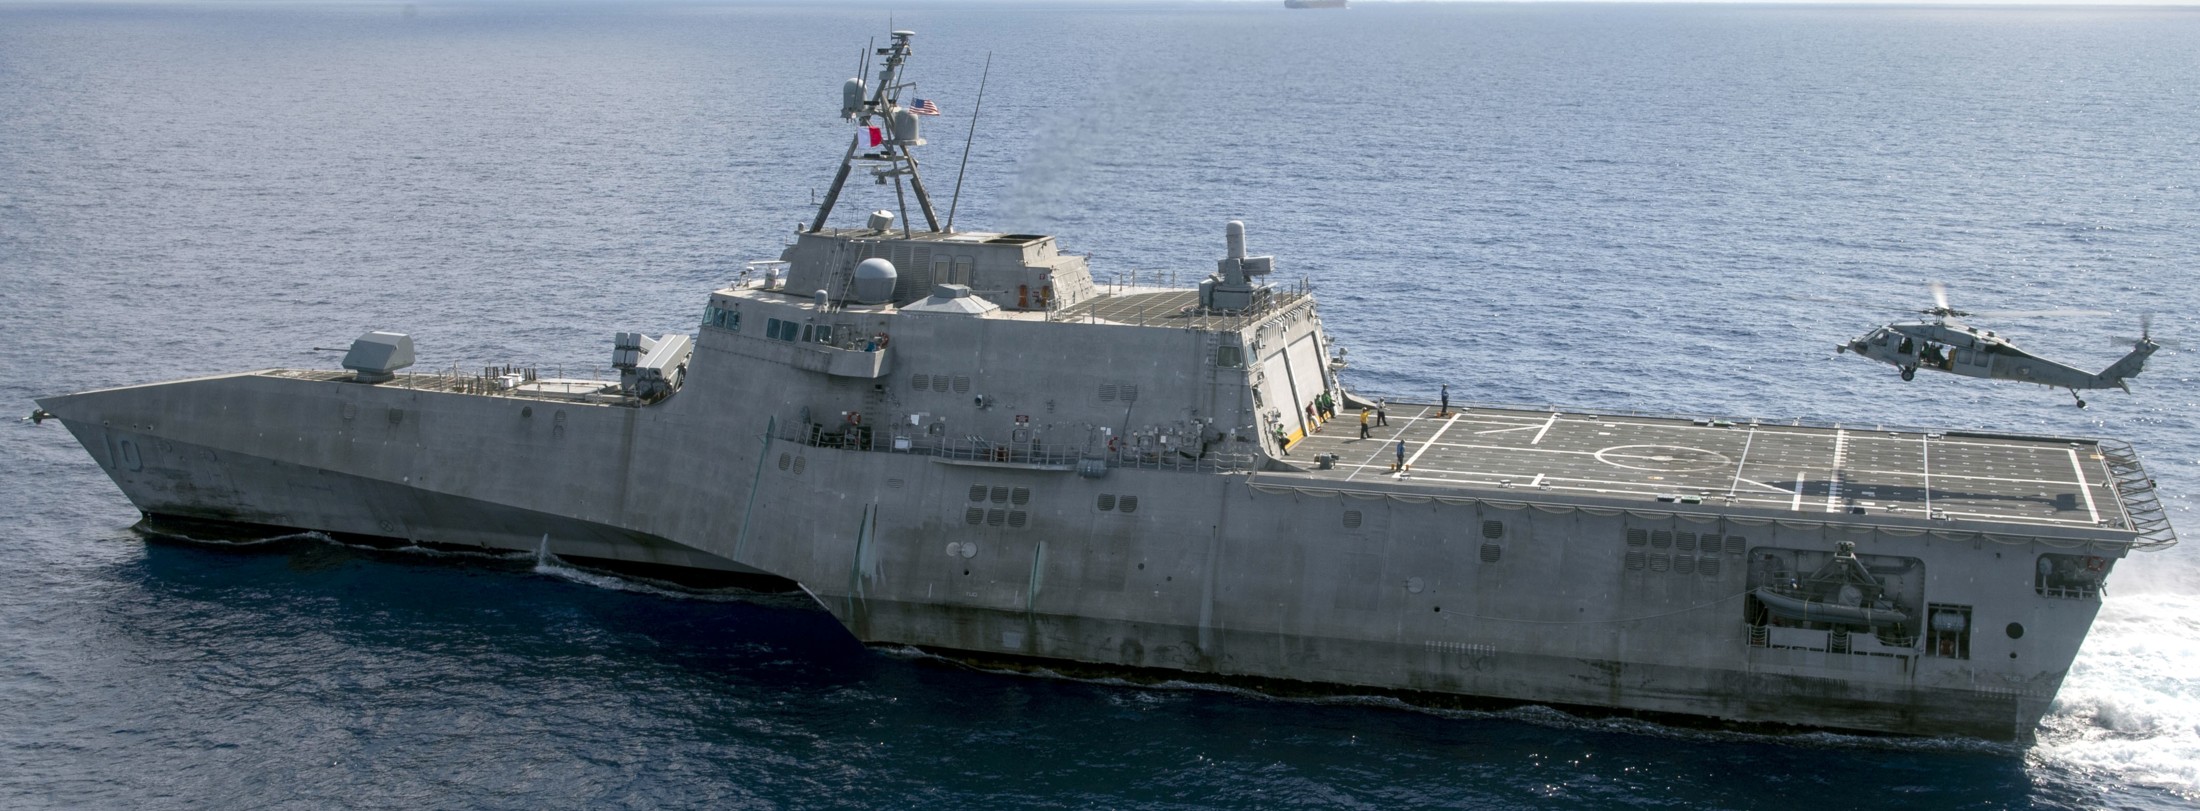 lcs-10 uss gabrielle giffords littoral combat ship independence class us navy 79 mh-60s seahawk helicopter